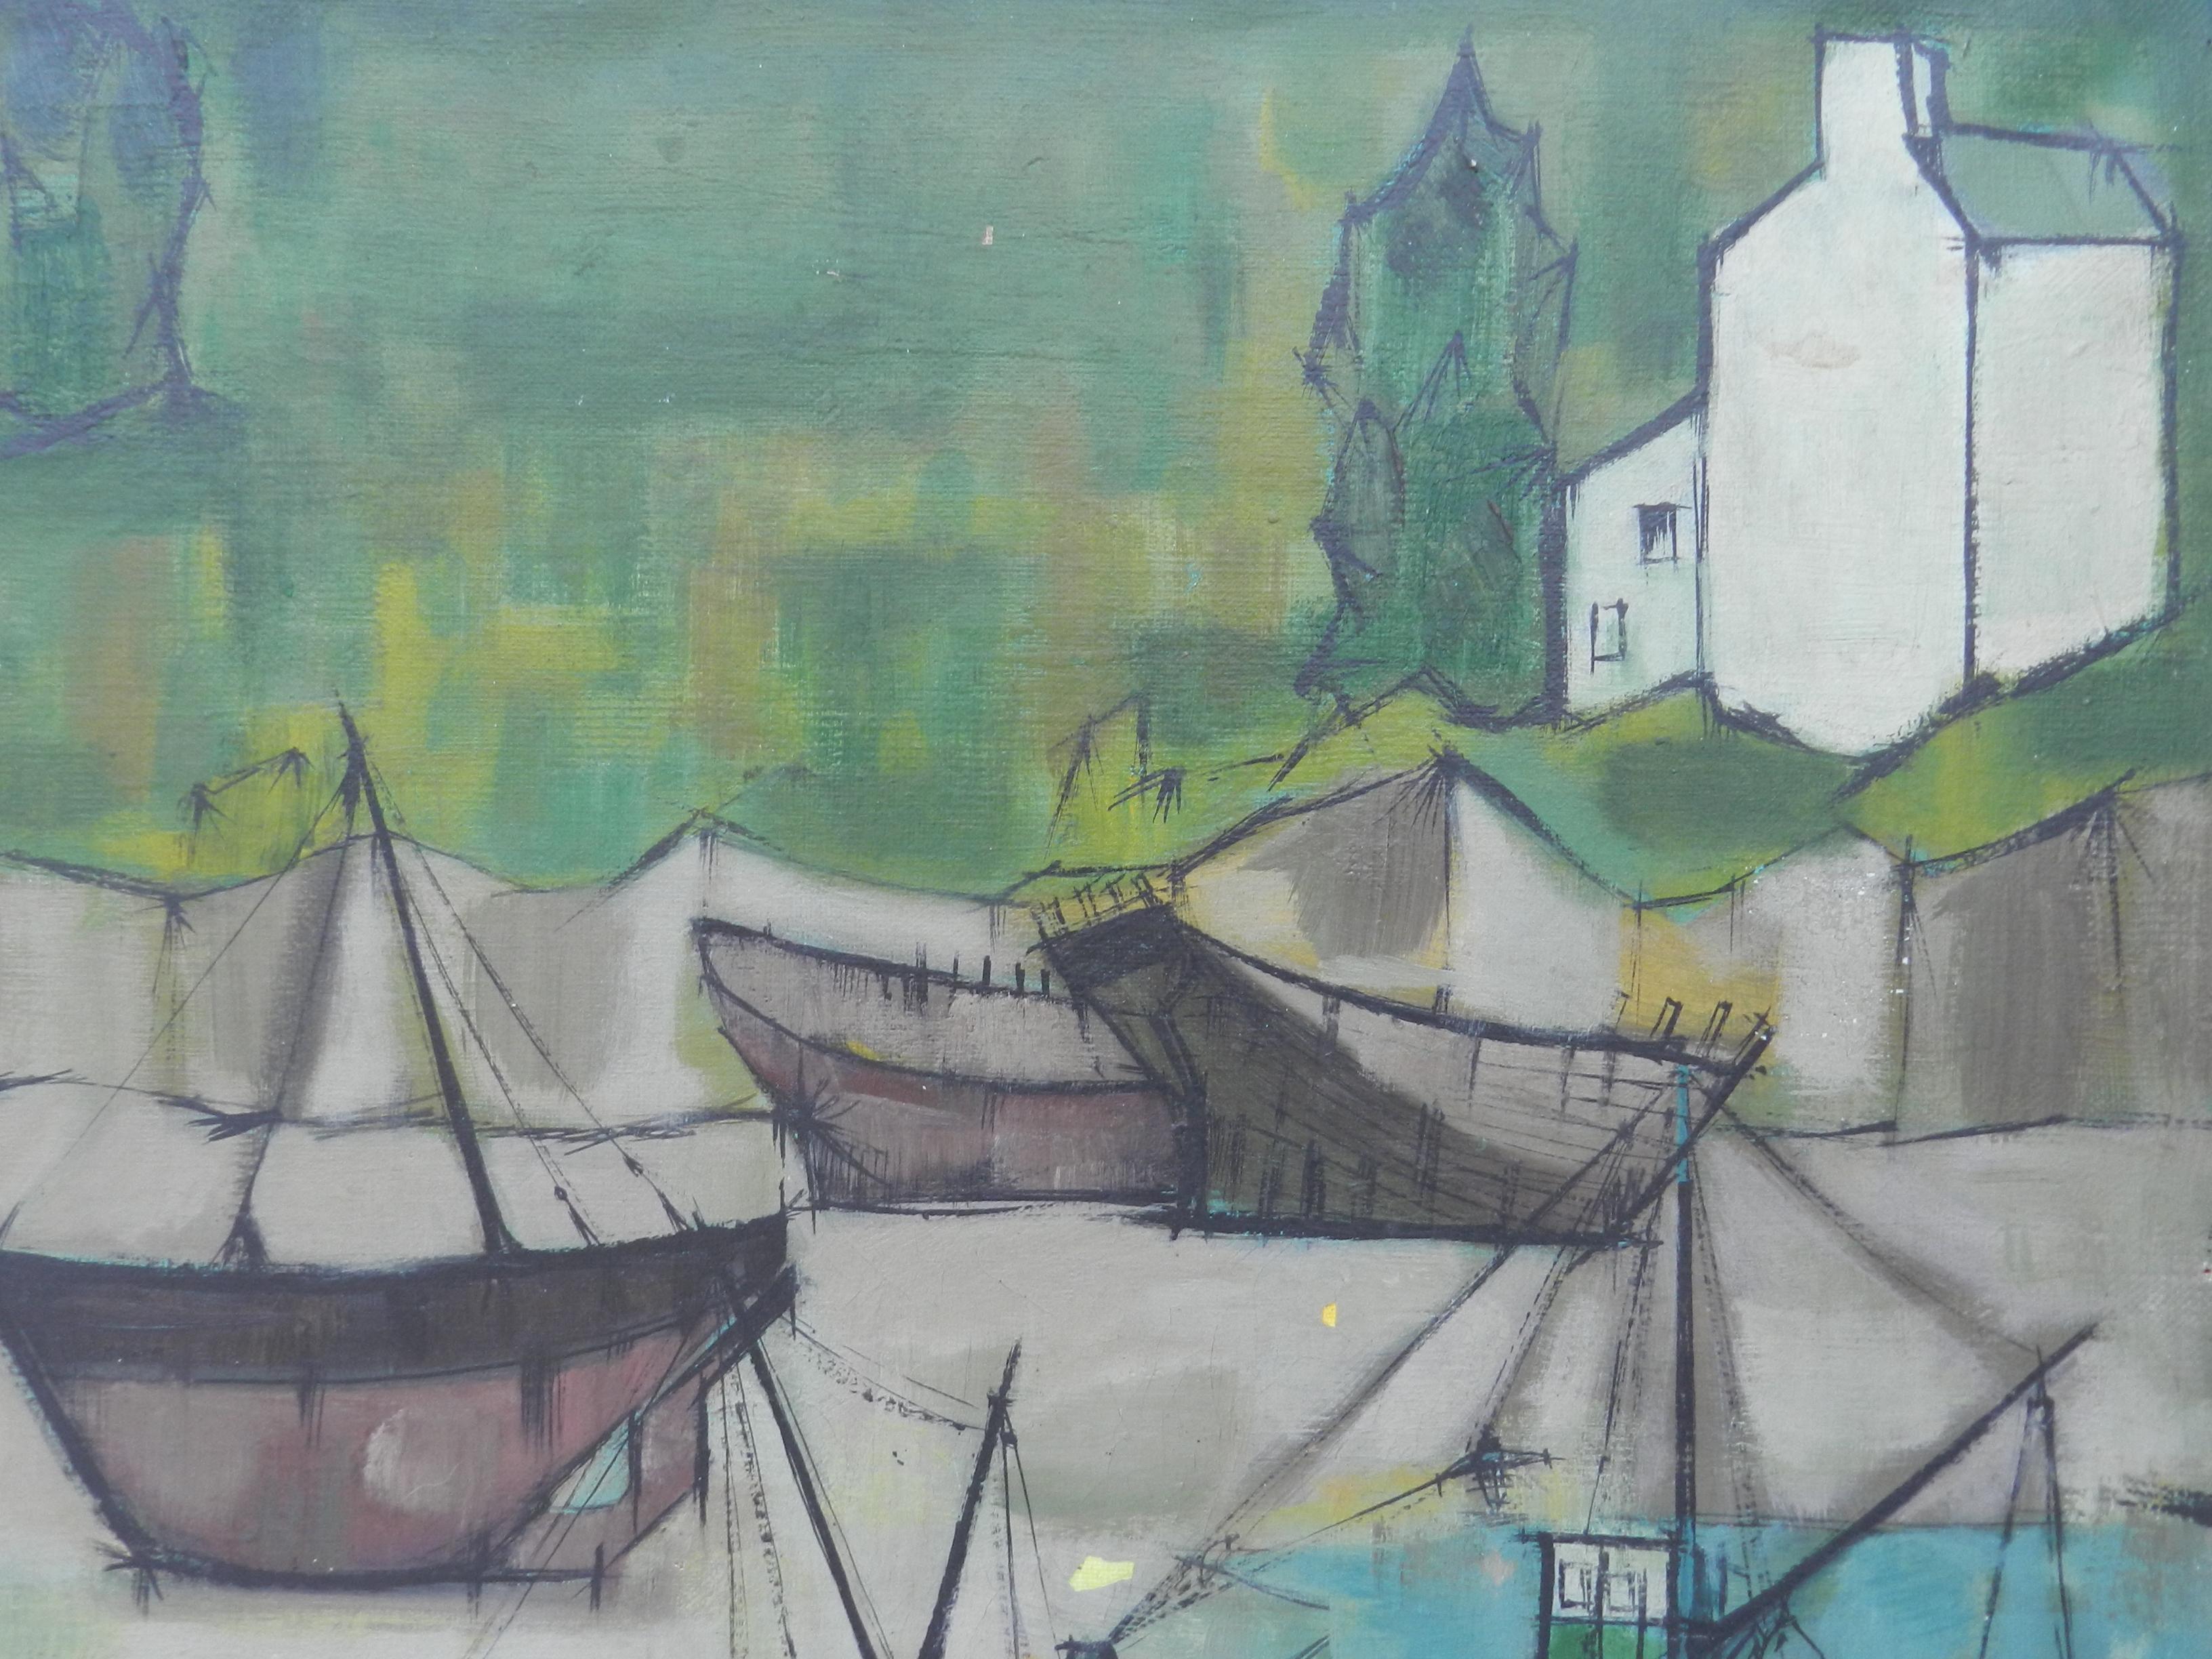 Boats at St Jean de Luz France by Jacouton Mid Century c1957
Superb painting at this time and had a diplpme de Beaux Arts
Jean Jacouton was a native of St Jean de Luz born 1933
Good vintage condition with a couple of very small losses to paint non